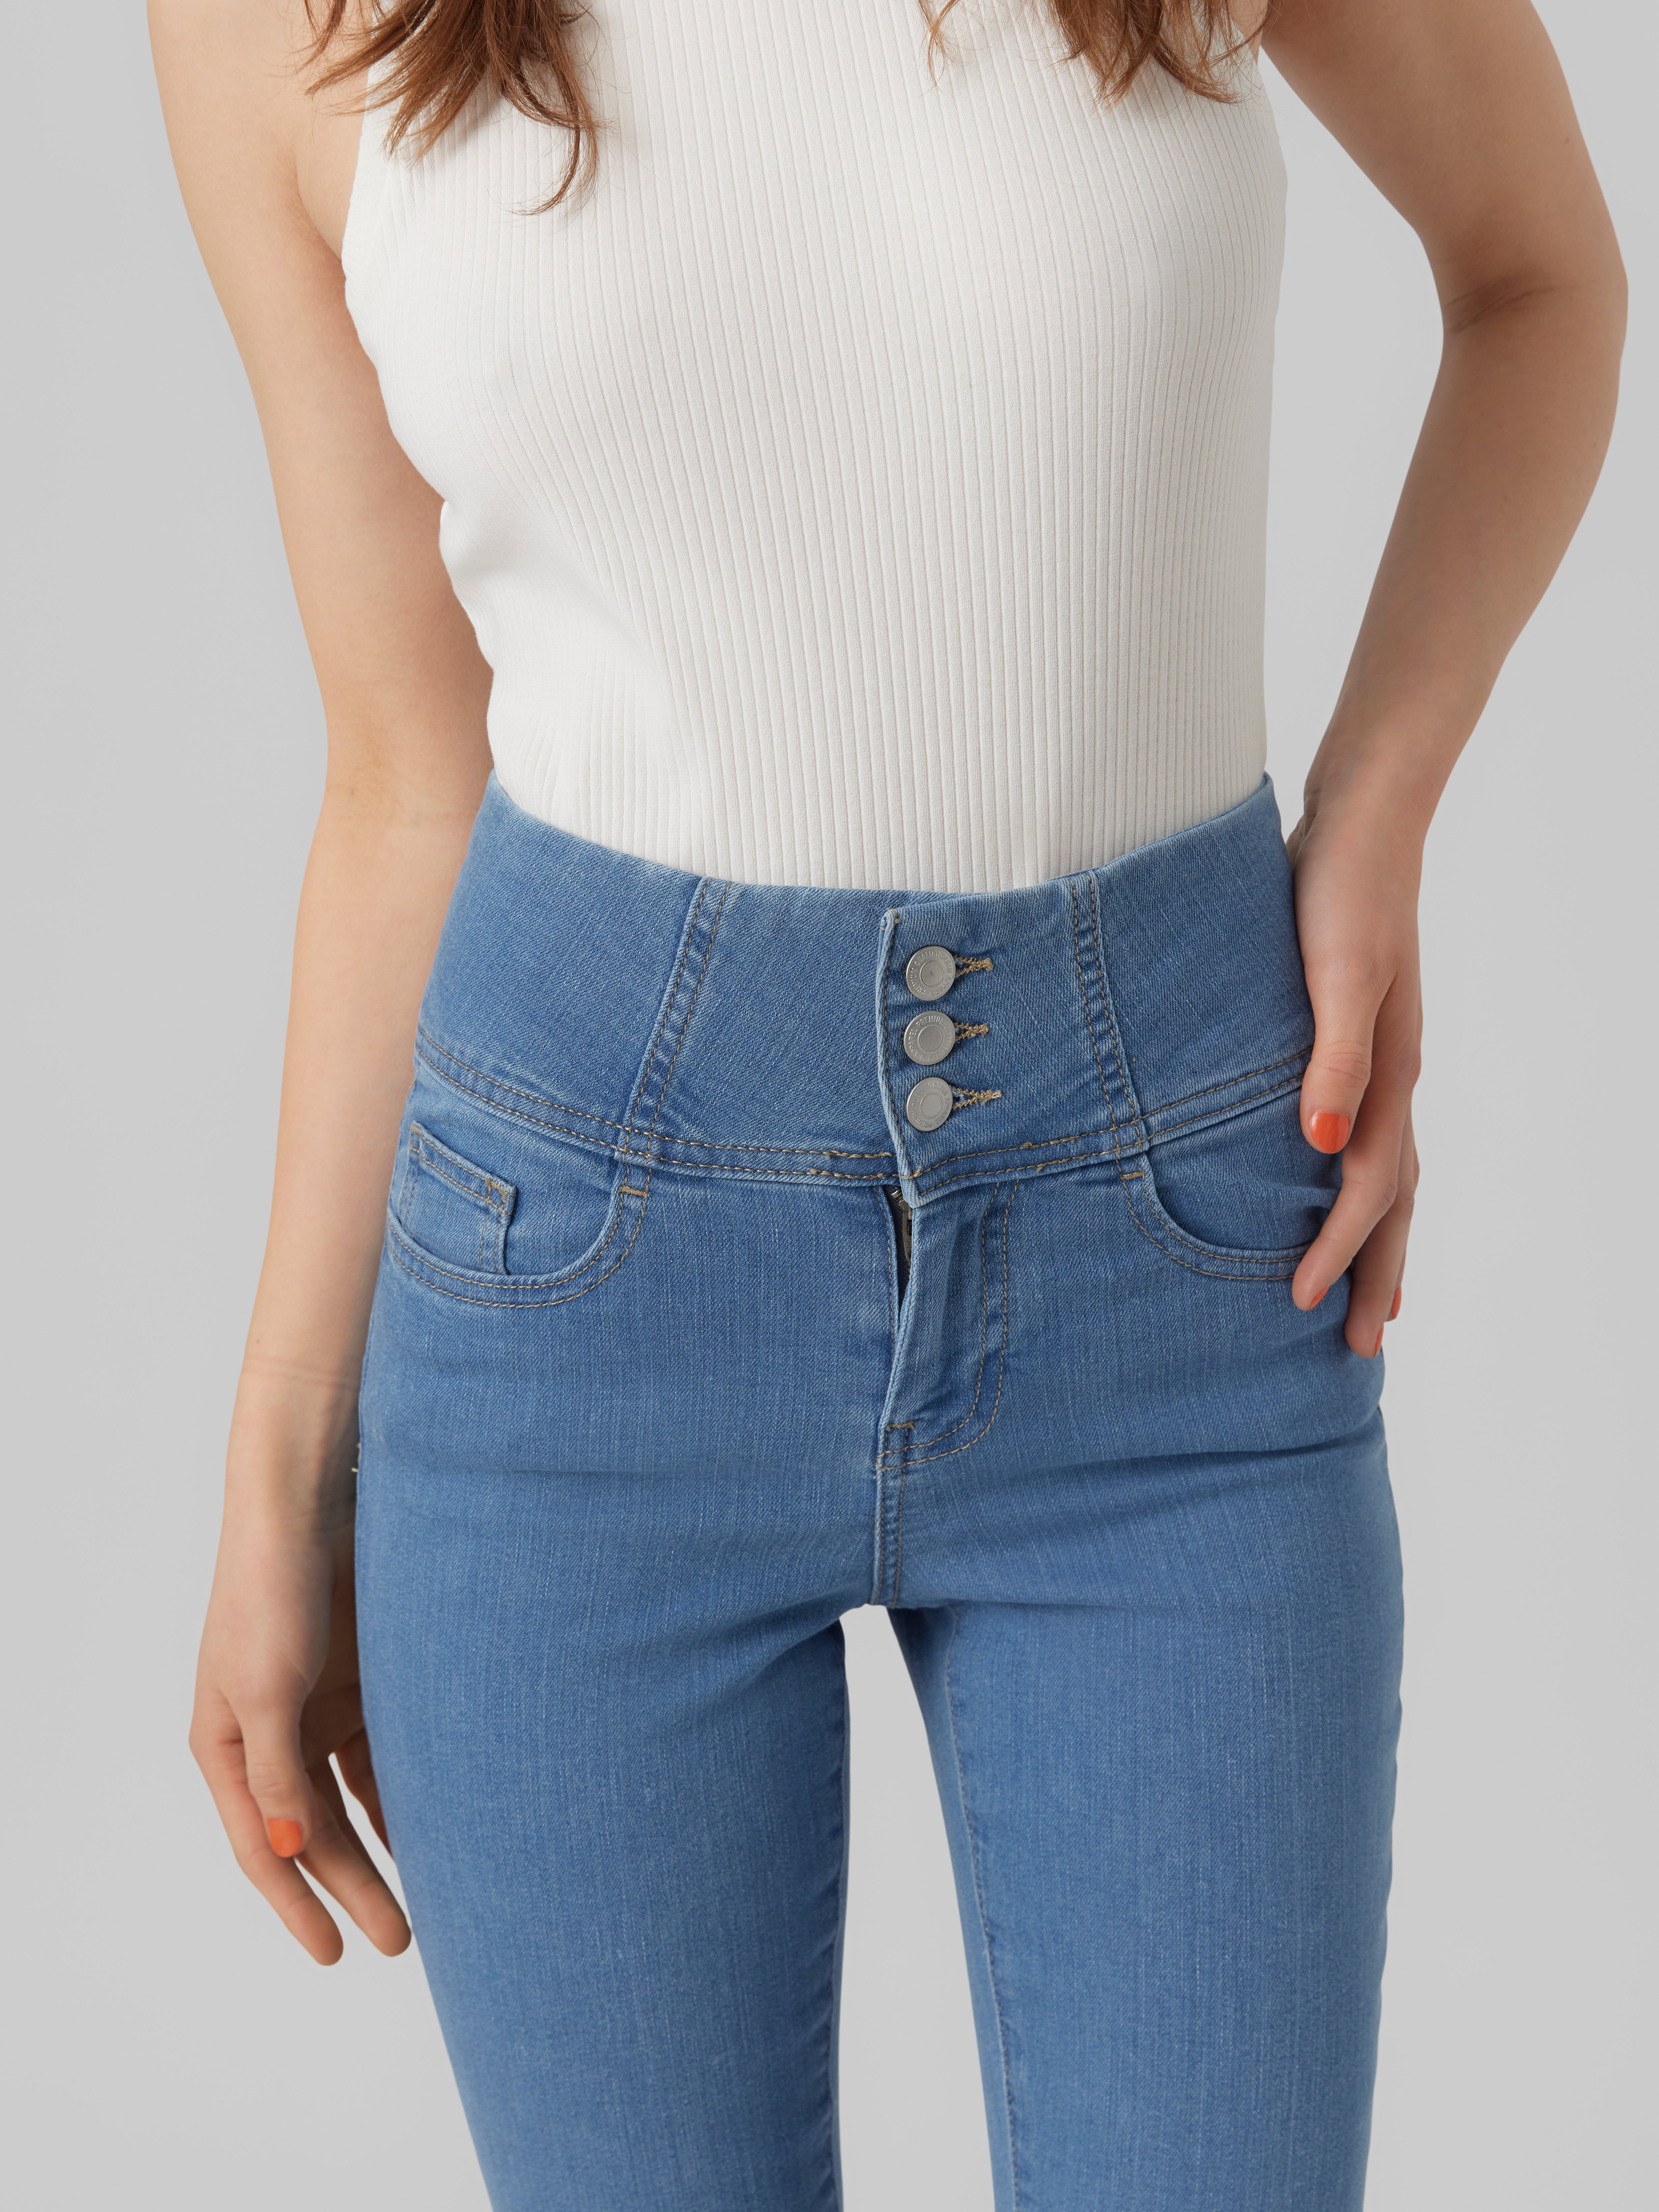 Old Navy Extra High-Waisted Jeans Review | POPSUGAR Fashion UK